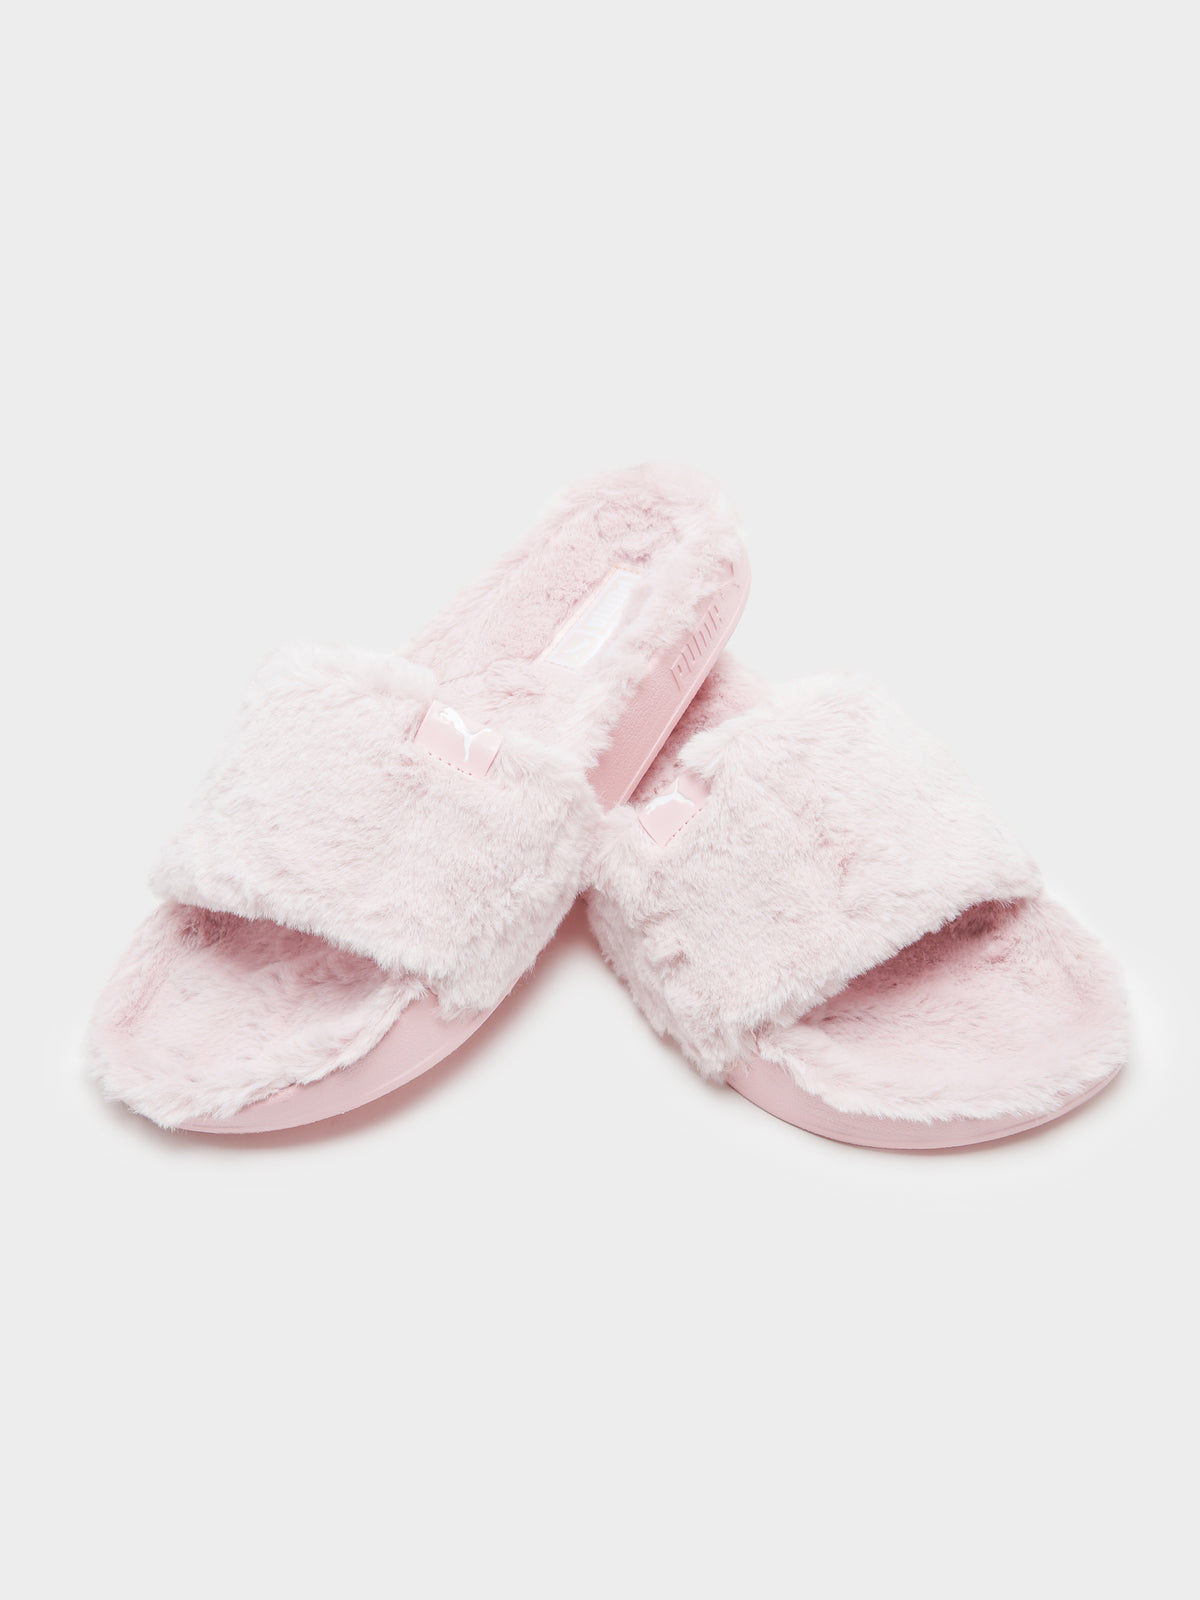 Womens Leadcat 2.0 Fluffy Slides in Chalk Pink